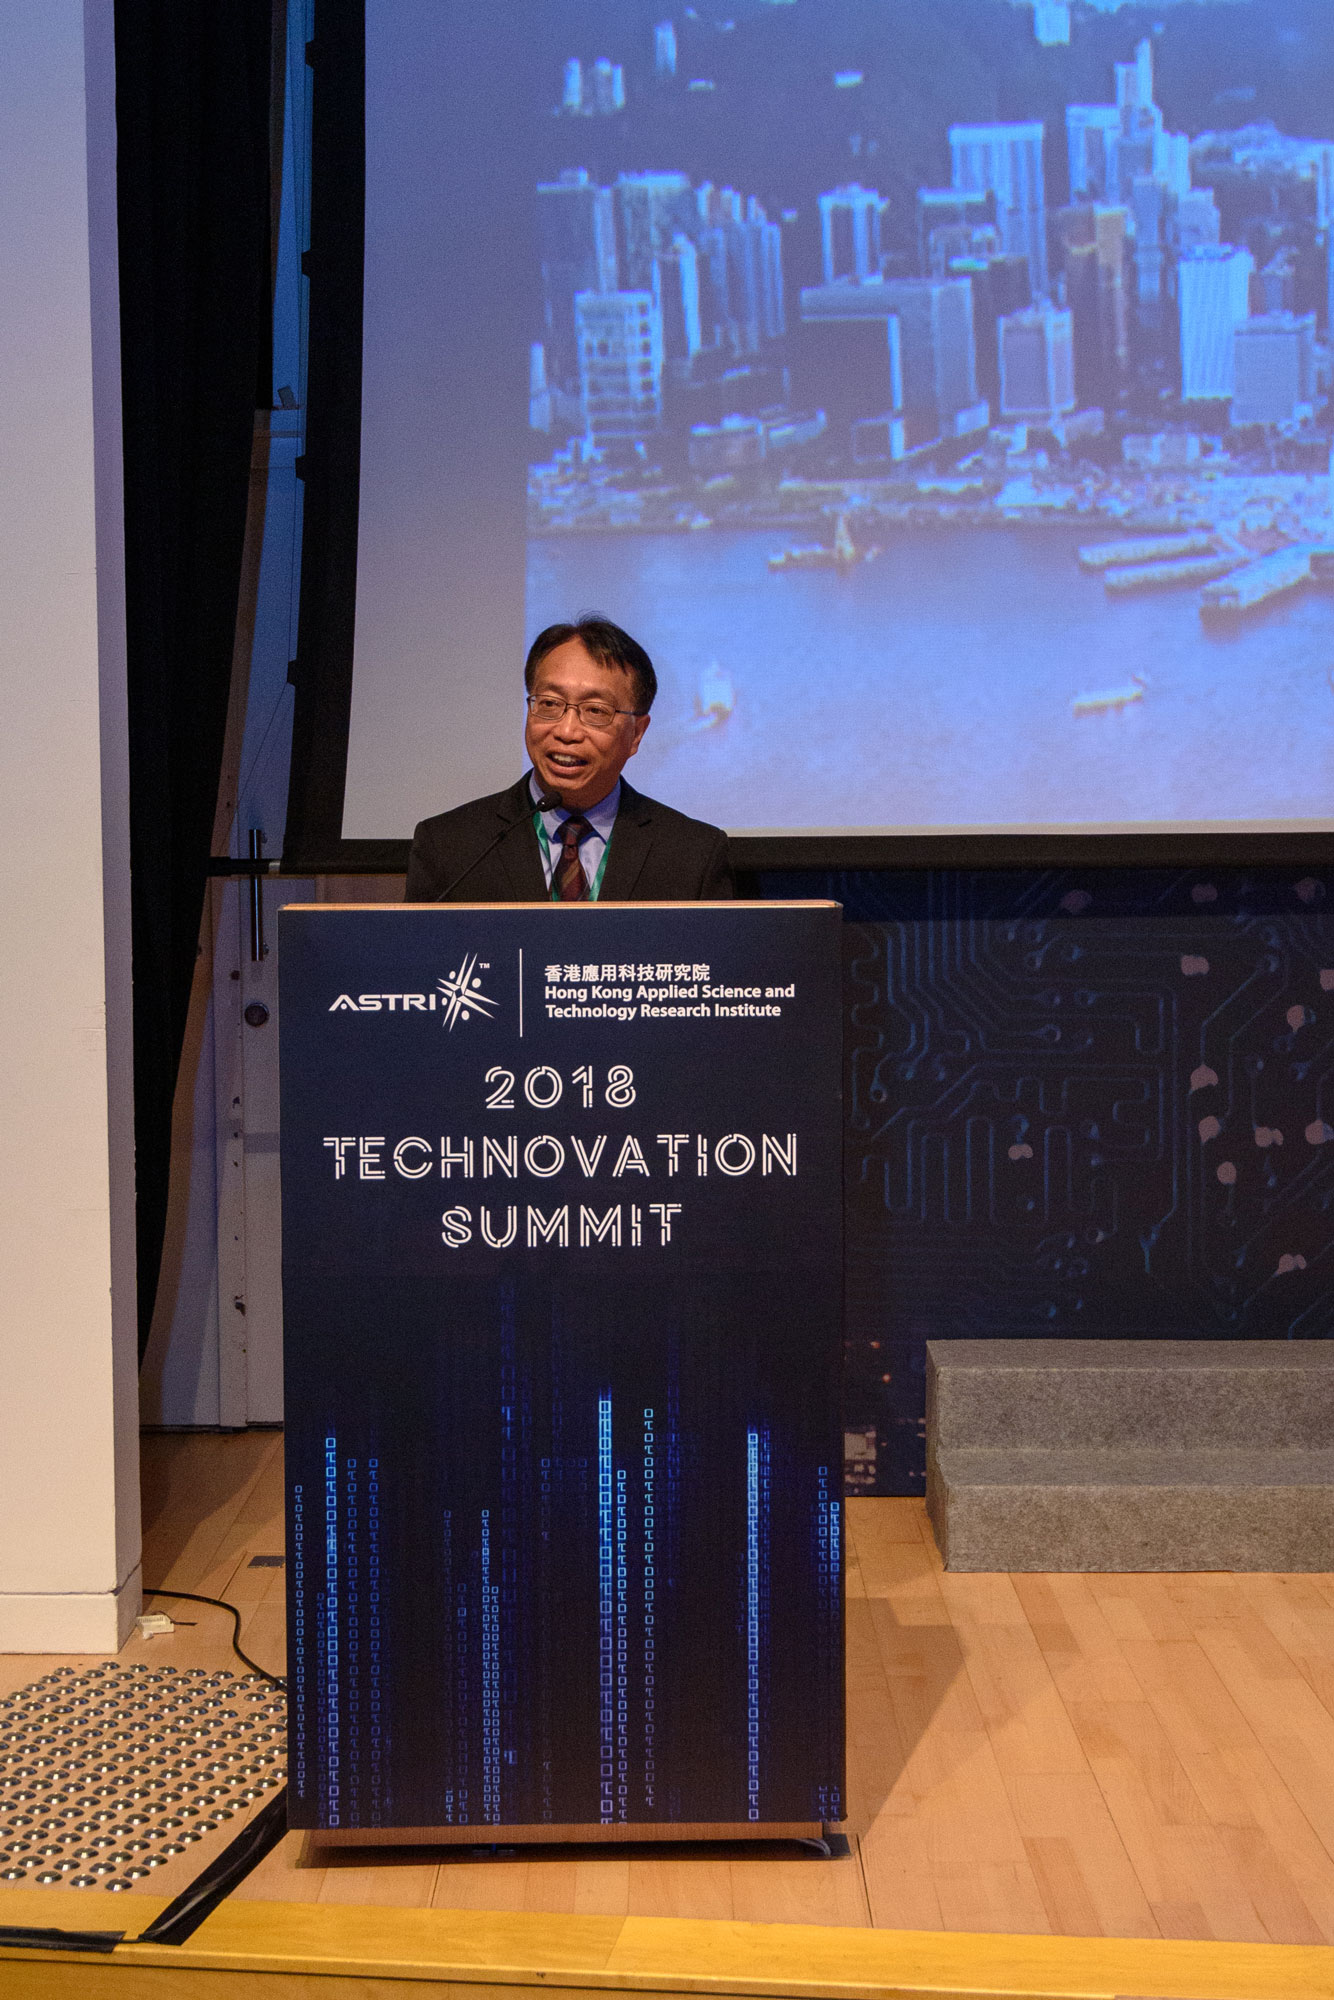 Mr. Jason Pun, Assistant Government Chief Information Officer (Cyber Security & Digital Identity), delivers Speech at the "ASTRI Technovation Summit".